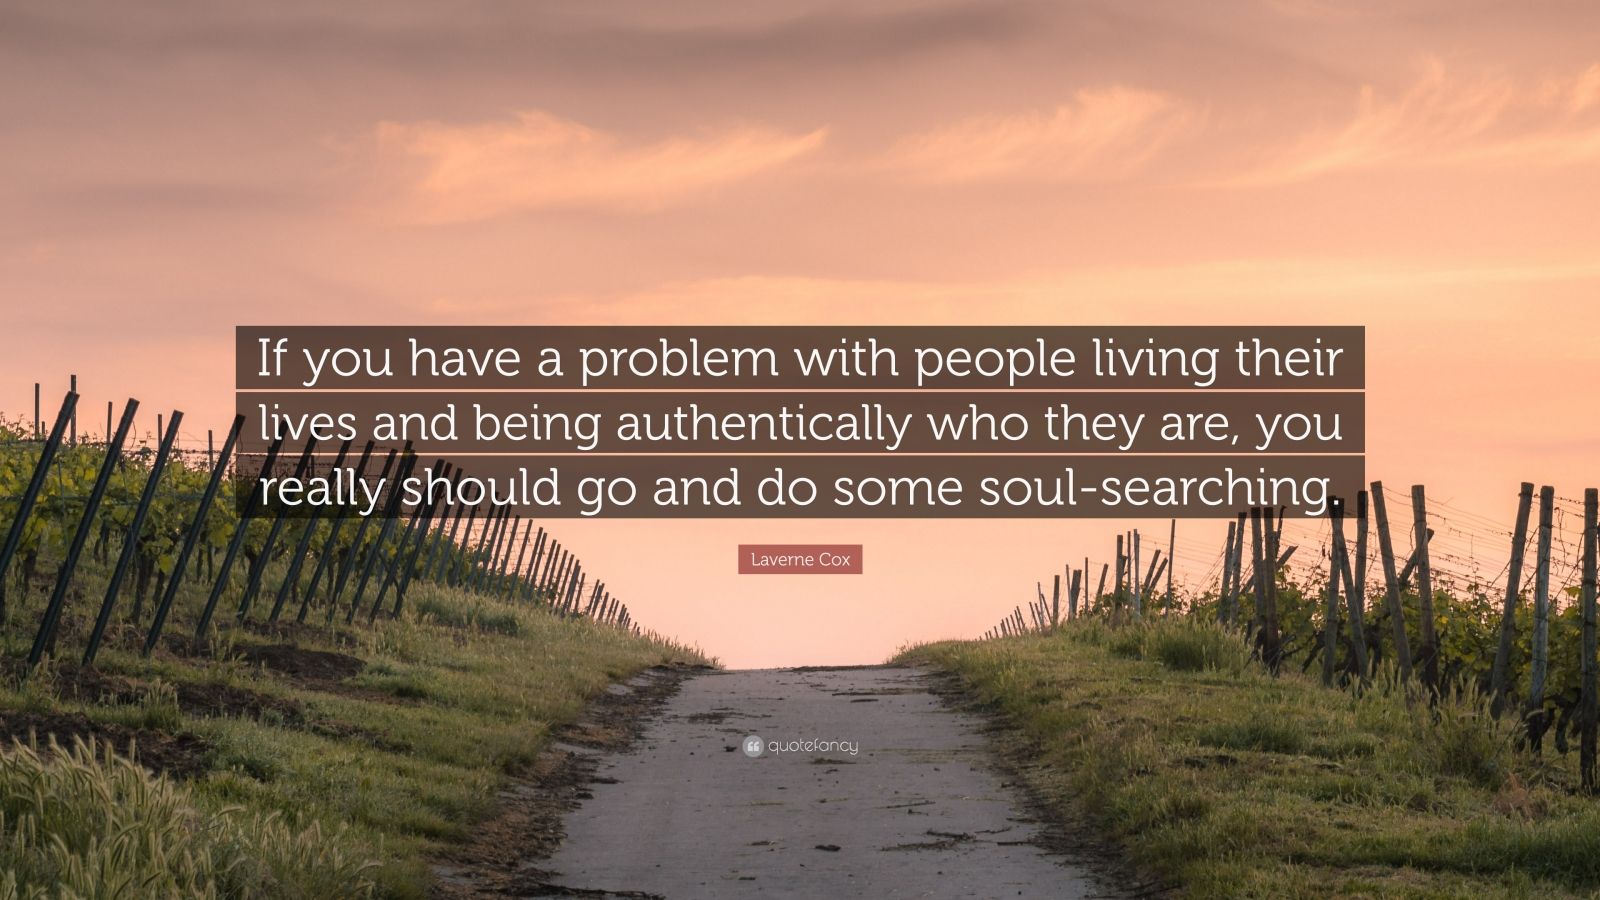 Laverne Cox Quote: "If you have a problem with people living their lives and being authentically ...